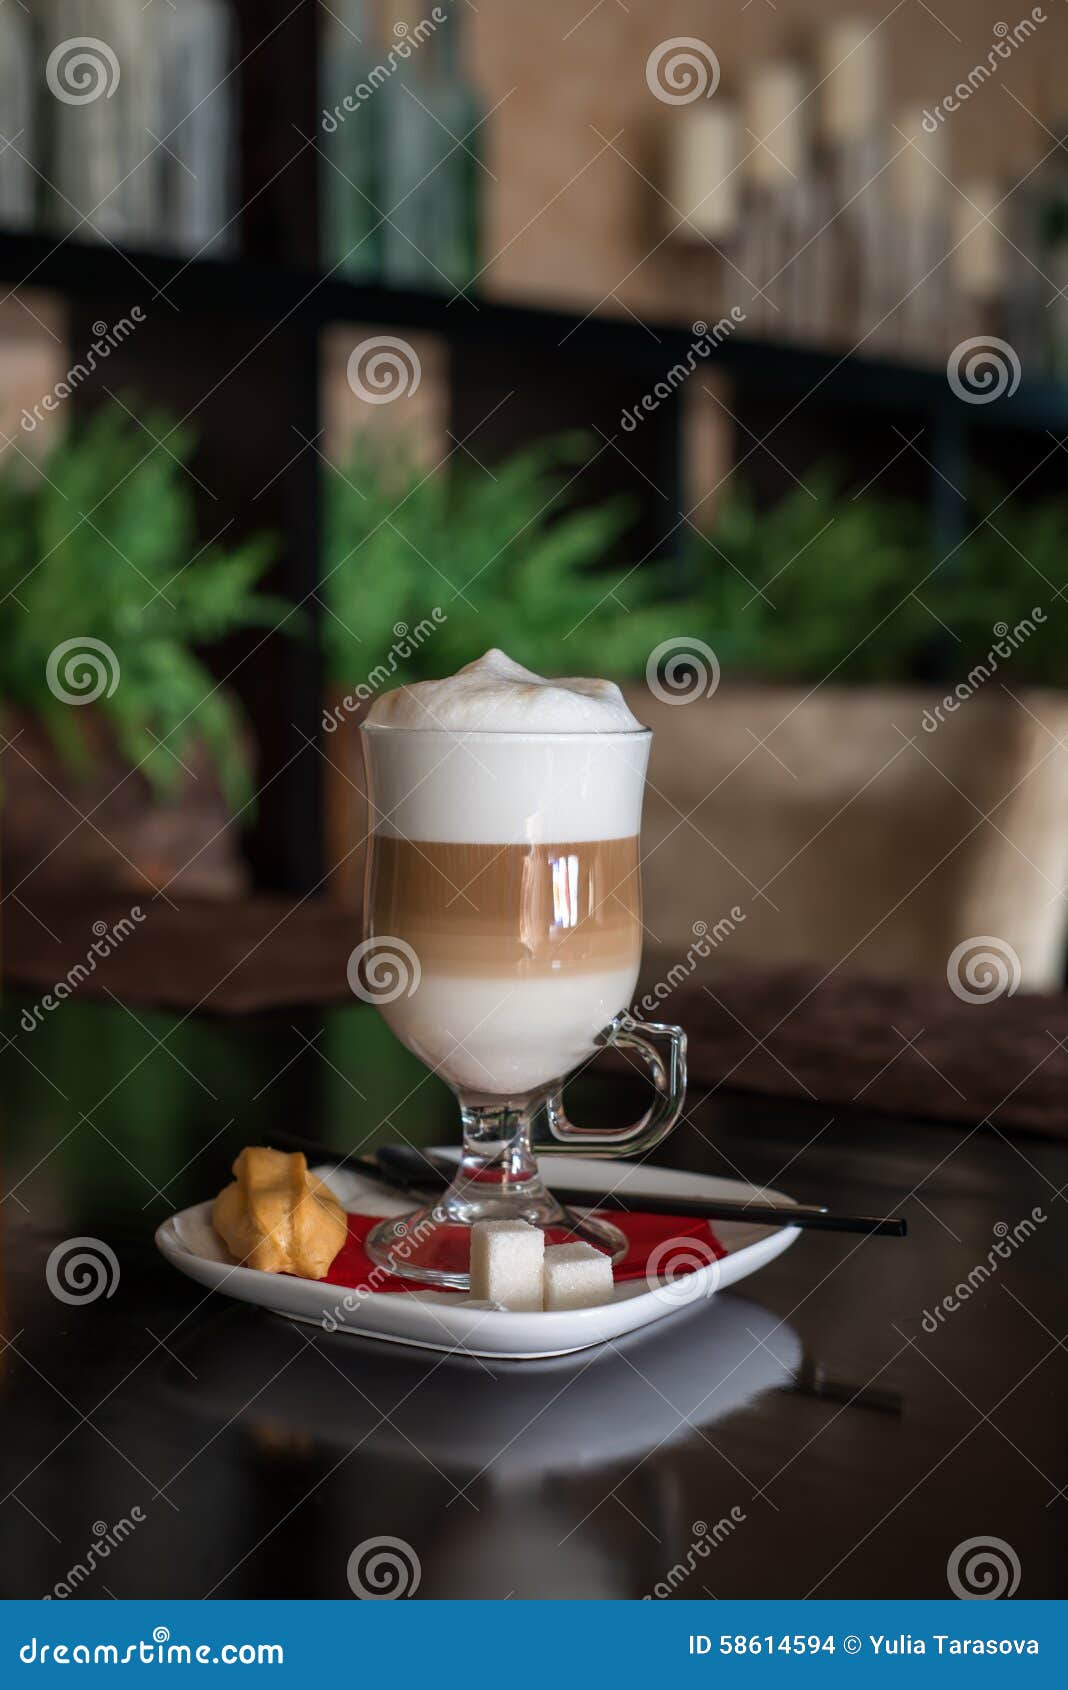 coffee latte in transparent glass silver in cafe